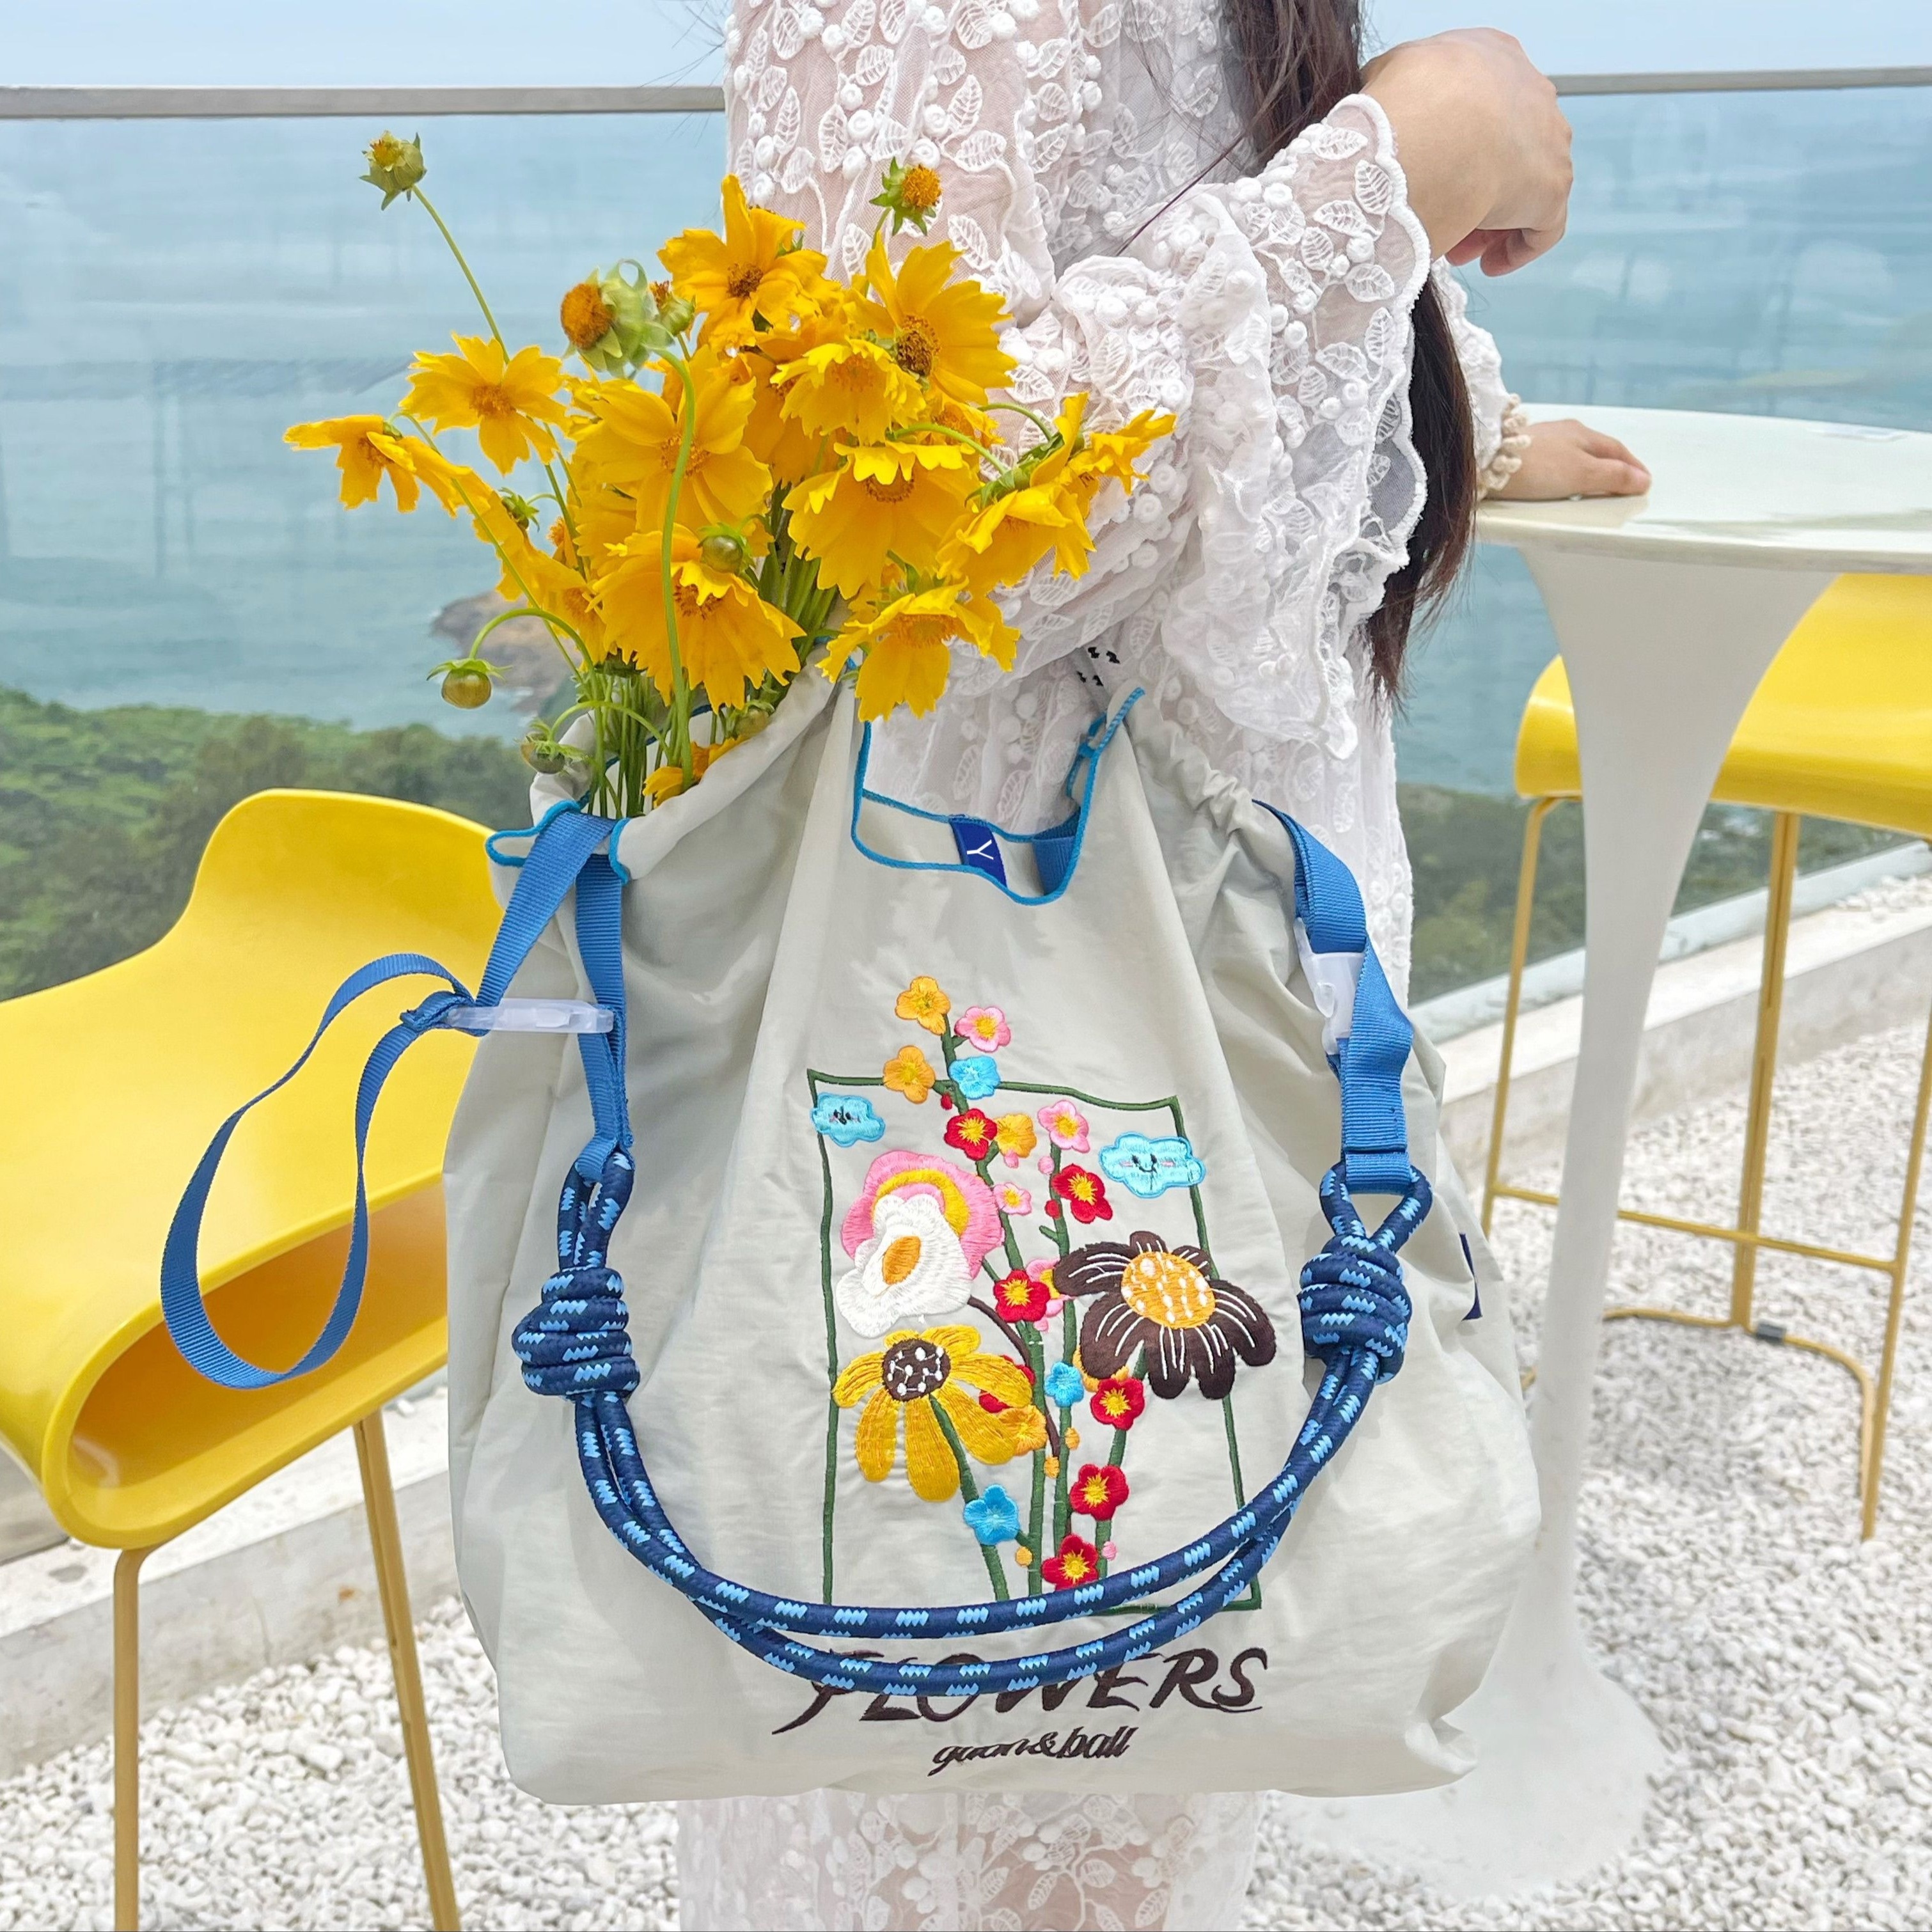 

Elegant Floral Embroidered Nylon Tote Bag With Detachable Shoulder Strap, Lightweight And Foldable Beach, Travel & Shopping Bag For Women